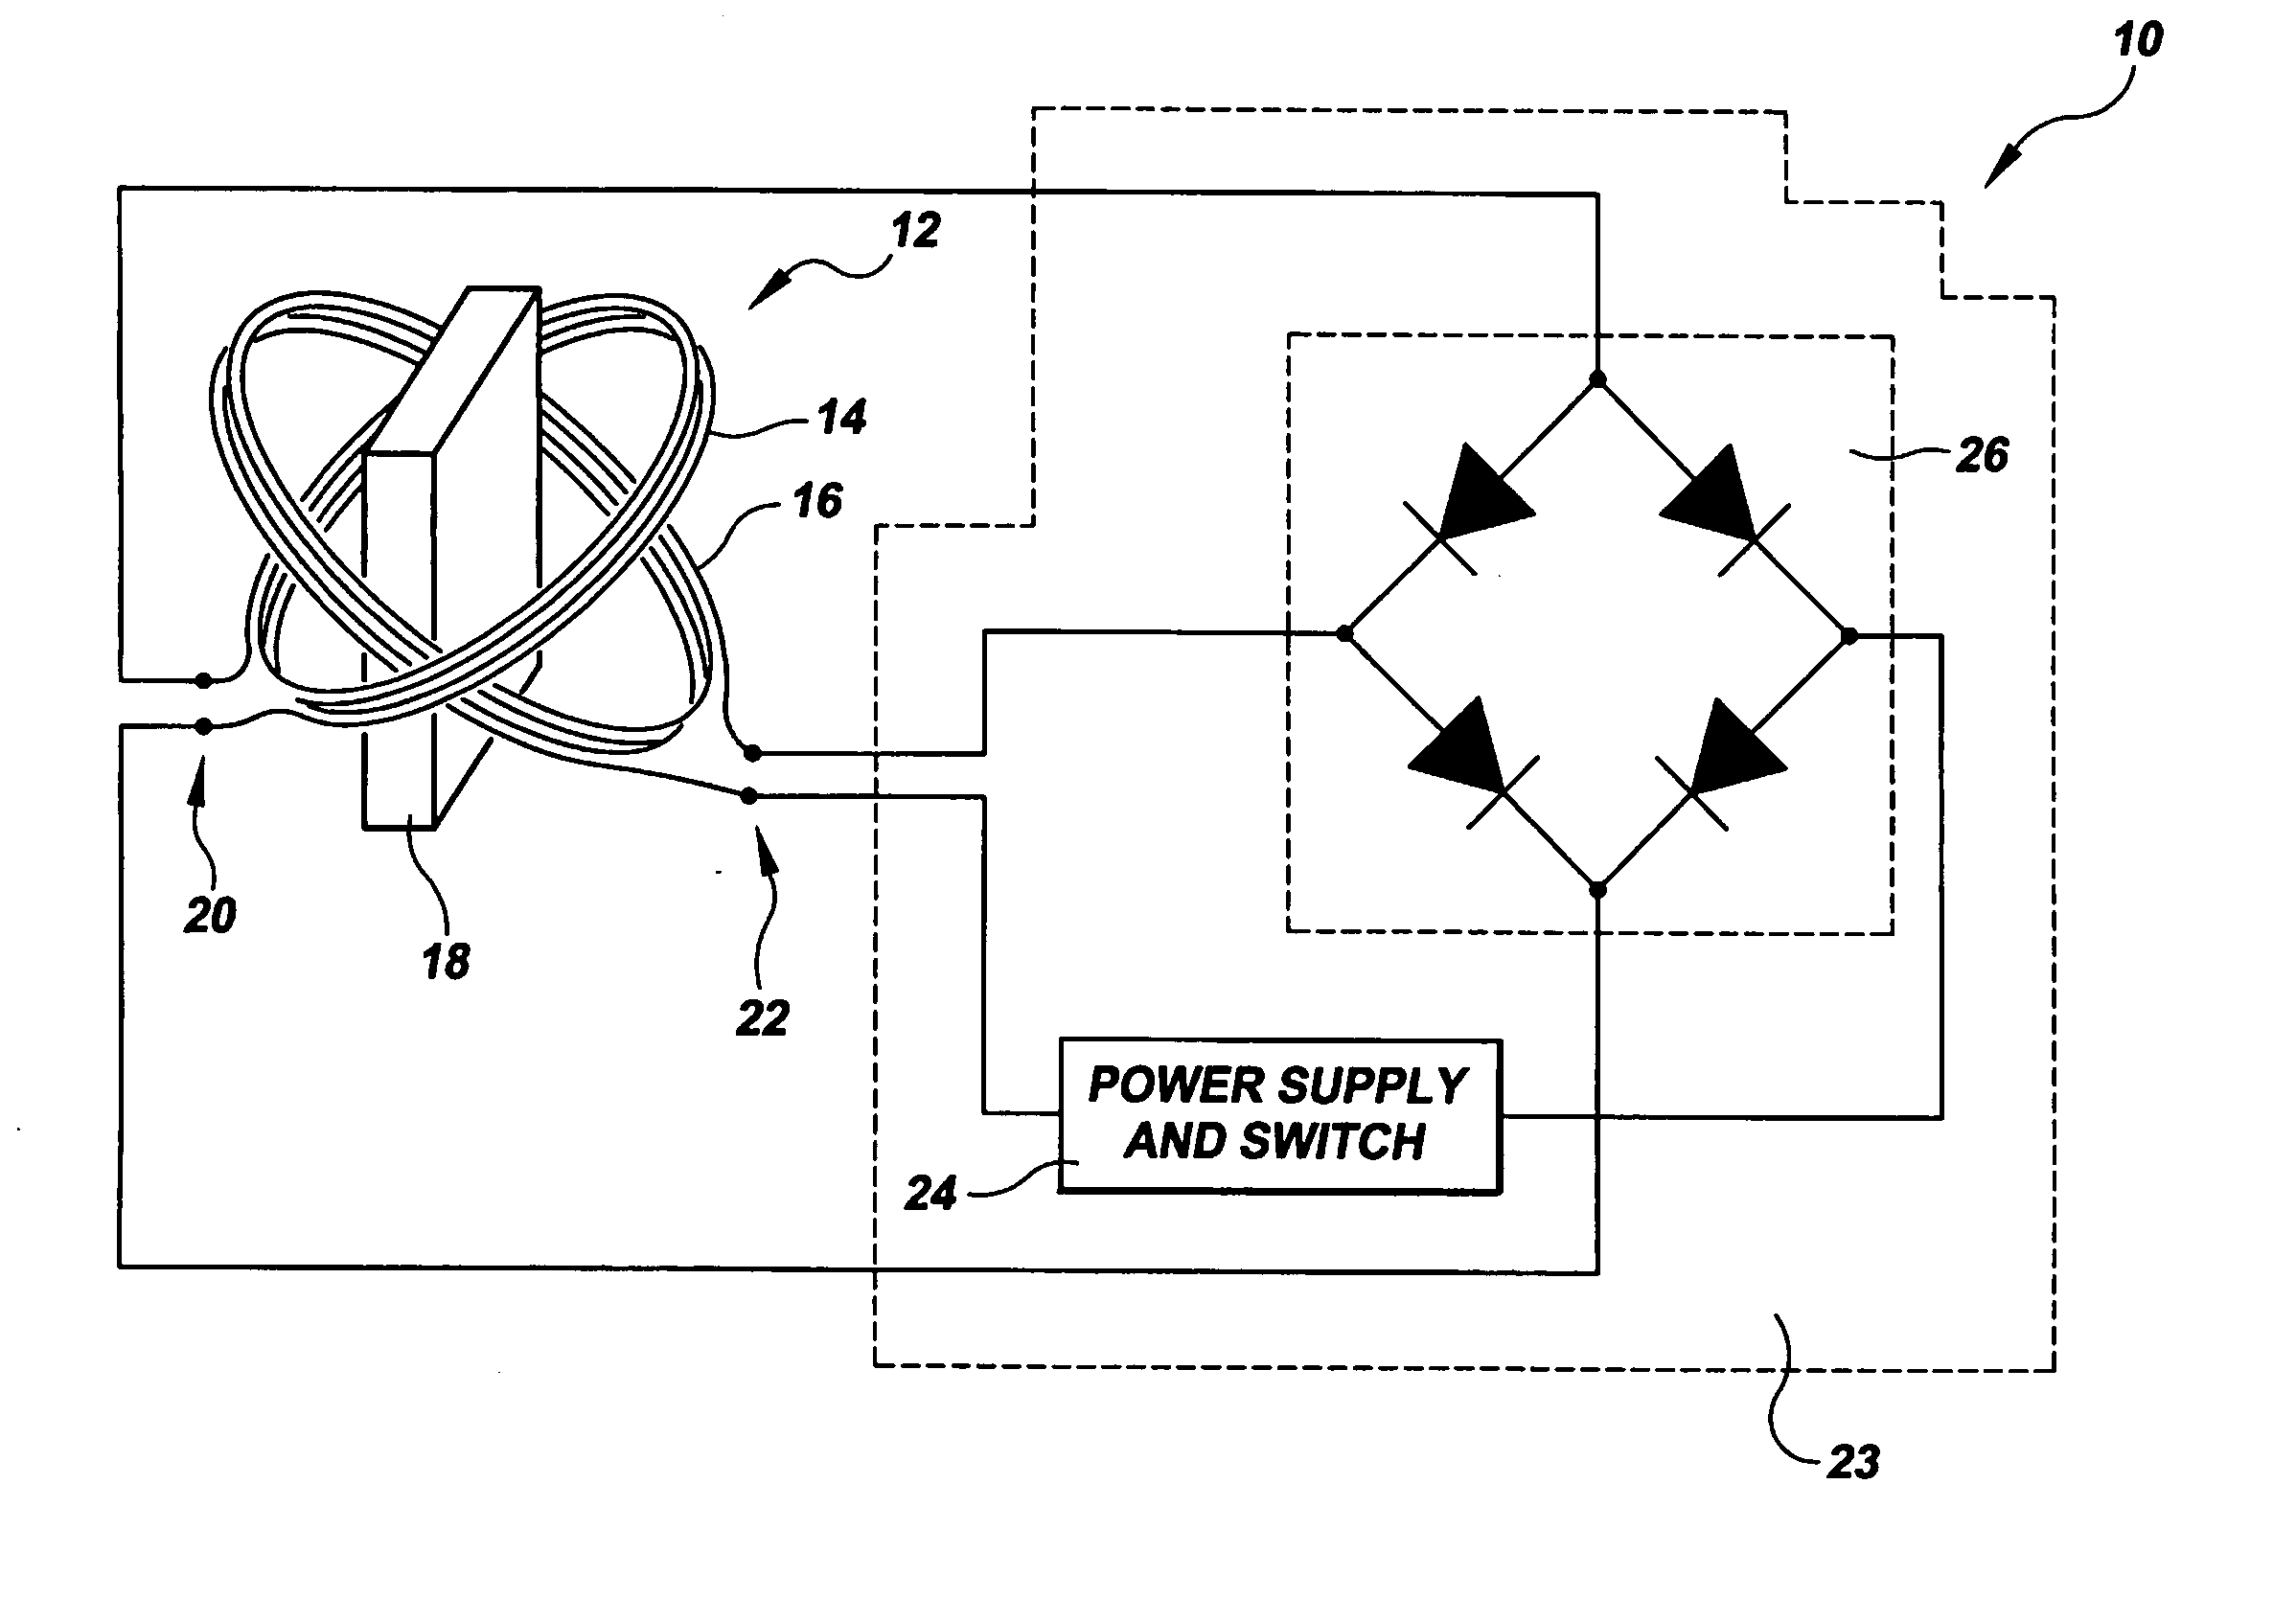 Magnetic actuator drive for actuation and resetting of magnetic actuation materials